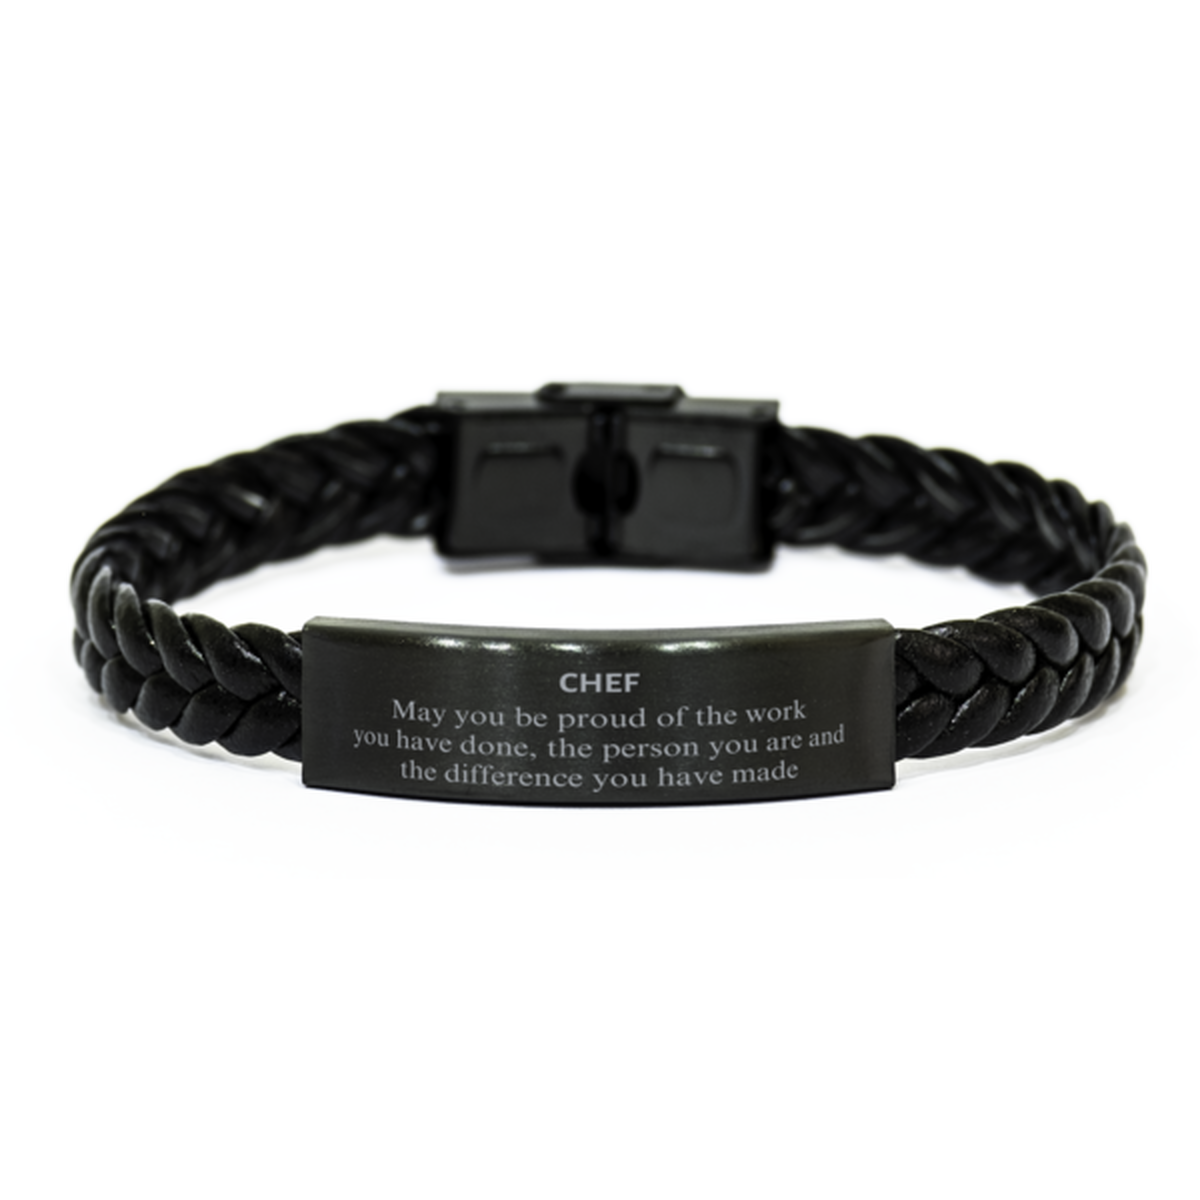 Chef May you be proud of the work you have done, Retirement Chef Braided Leather Bracelet for Colleague Appreciation Gifts Amazing for Chef